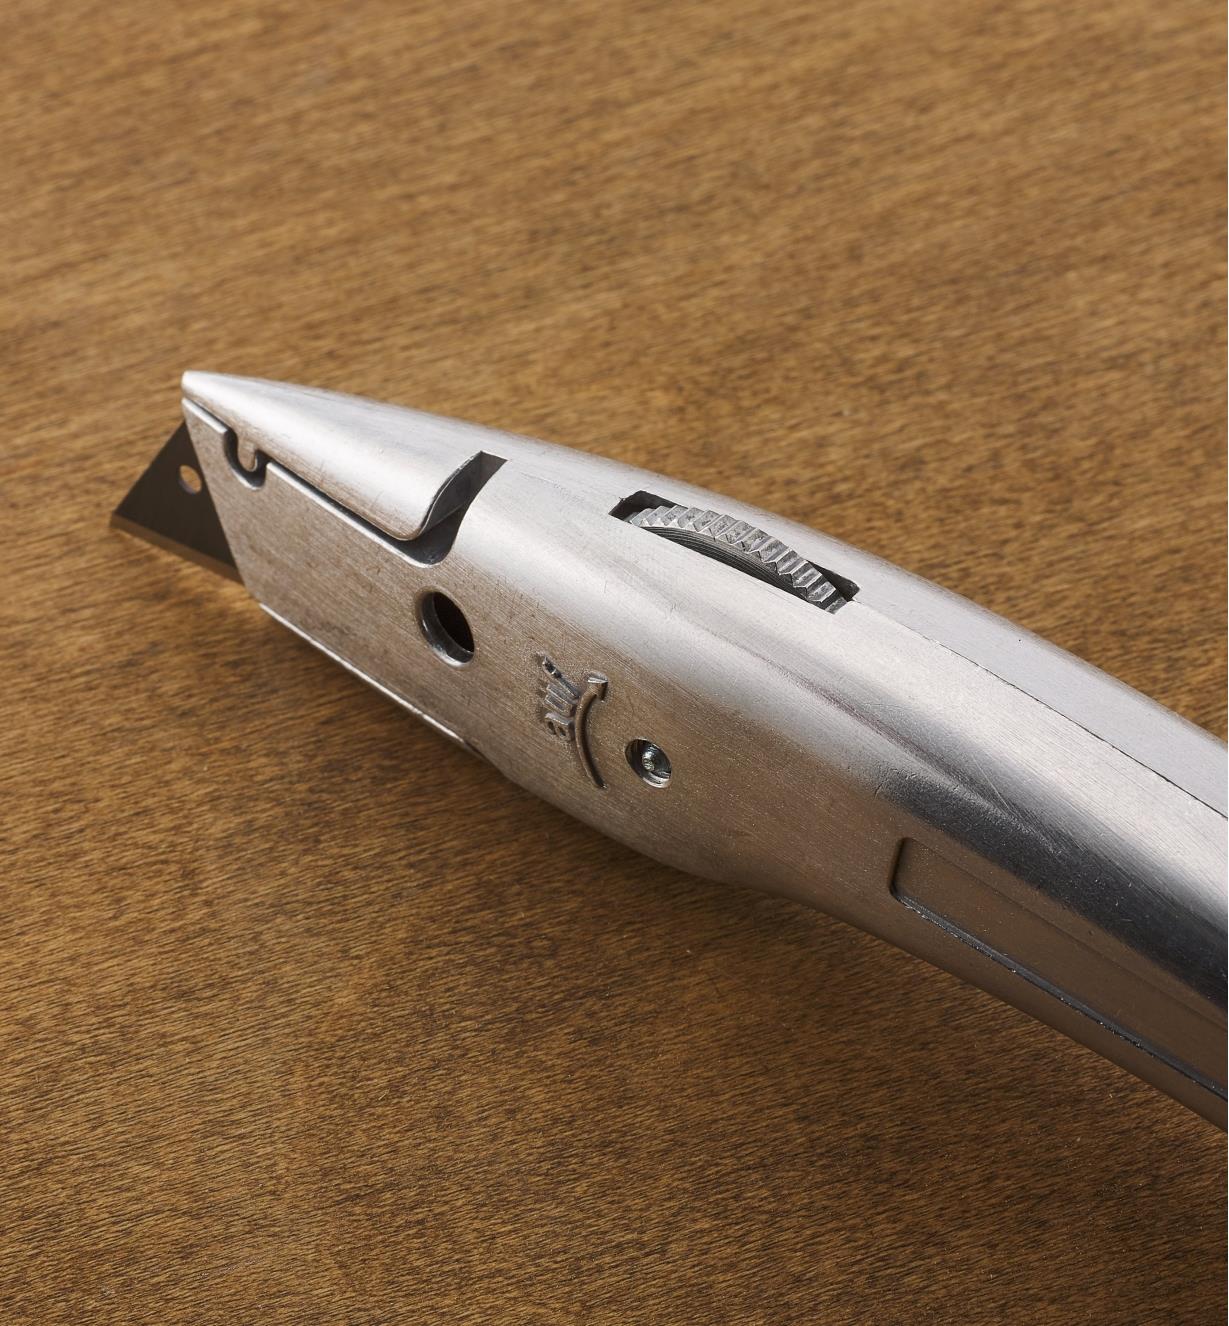 A close-up top view of the Delphin 03 utility knife showing the trapped-wheel blade mechanism